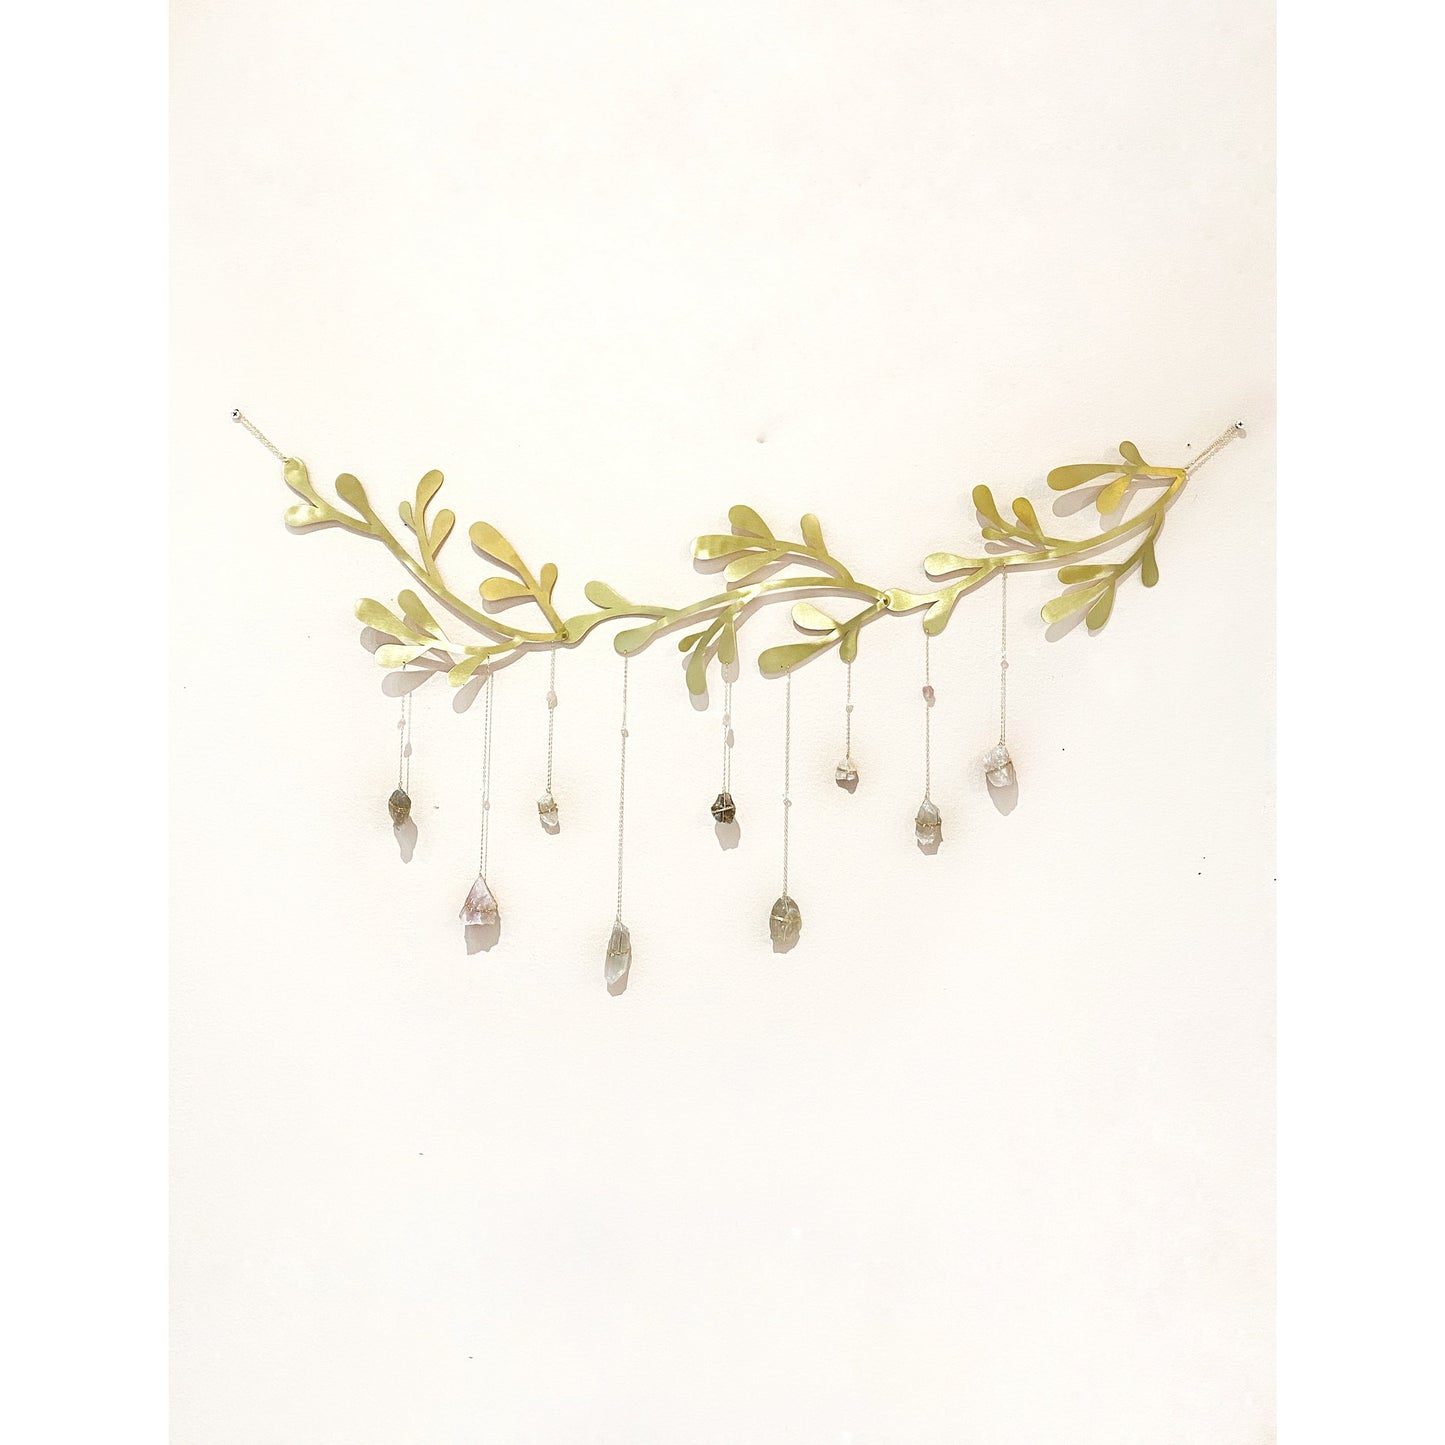 Floral Vines Healing Crystal Garland by Ariana Ost